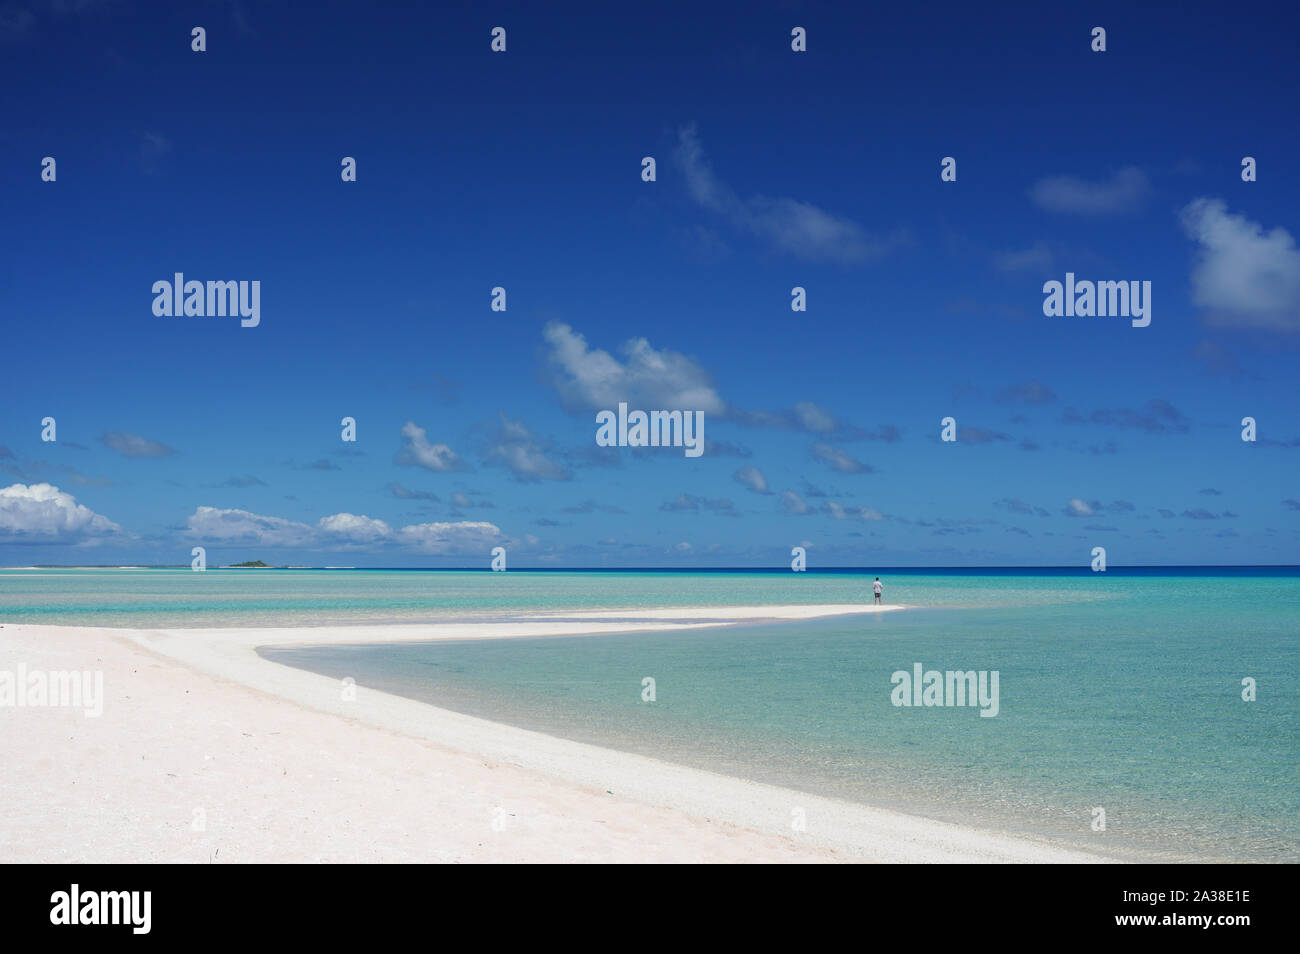 A man stands at the tip of a white sandy beach surrounded by a turquoise lagoon on the island of Fakarava, French Polynesia in the South Pacific Stock Photo